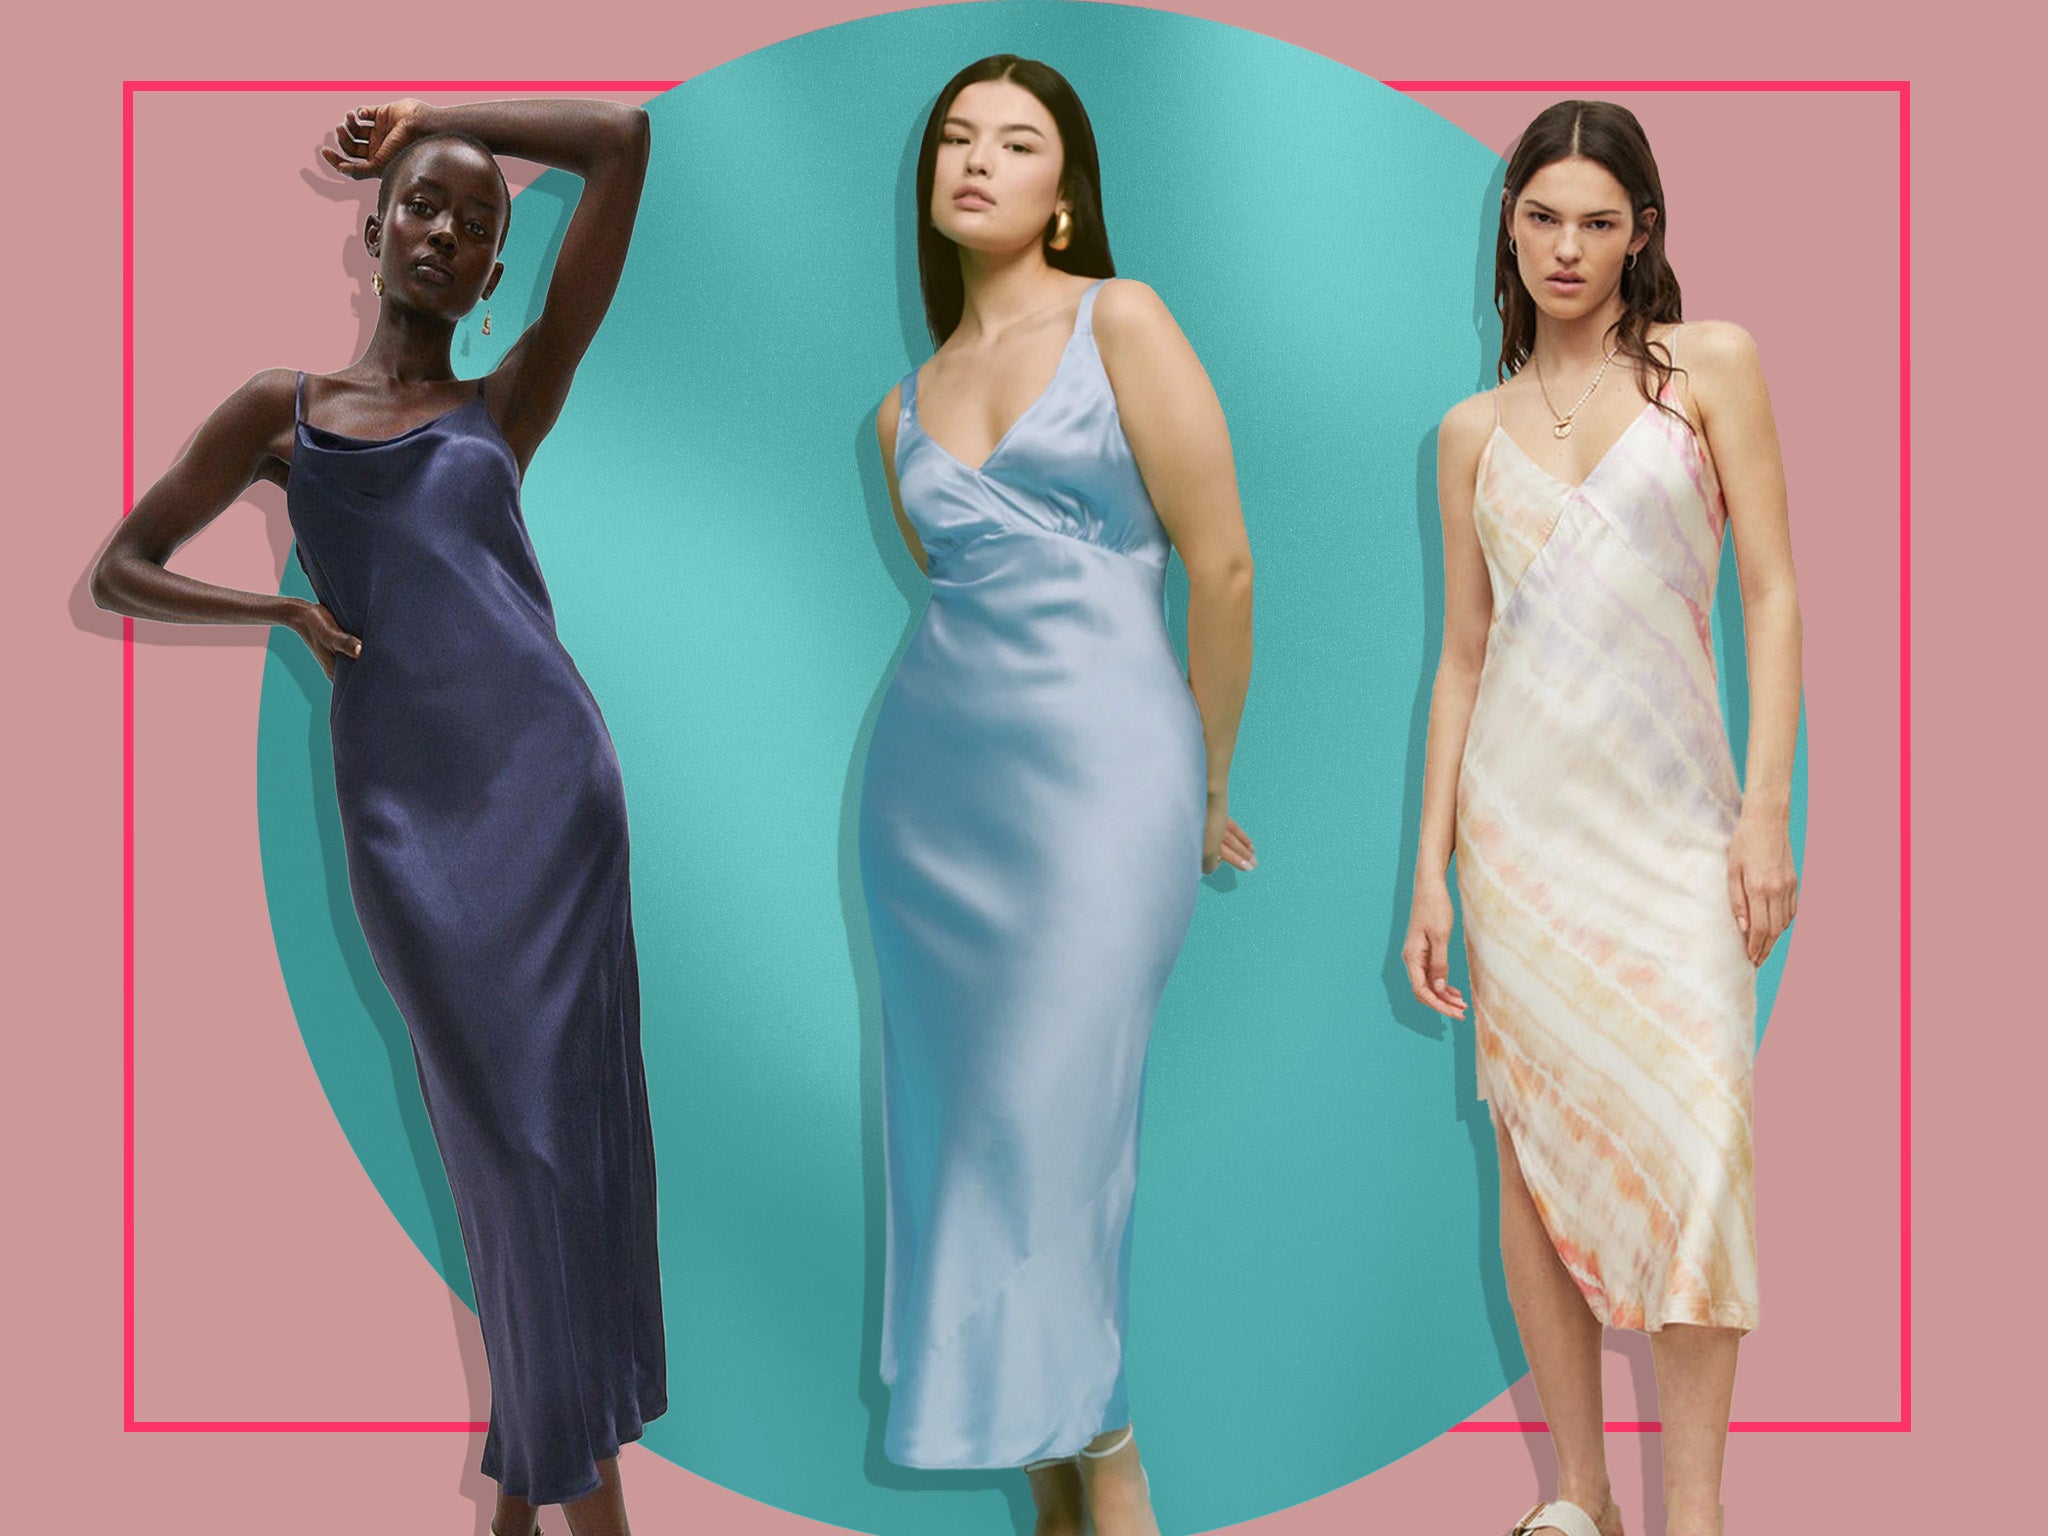 The Satin Slip Dress You Need Now - and ways you can style it